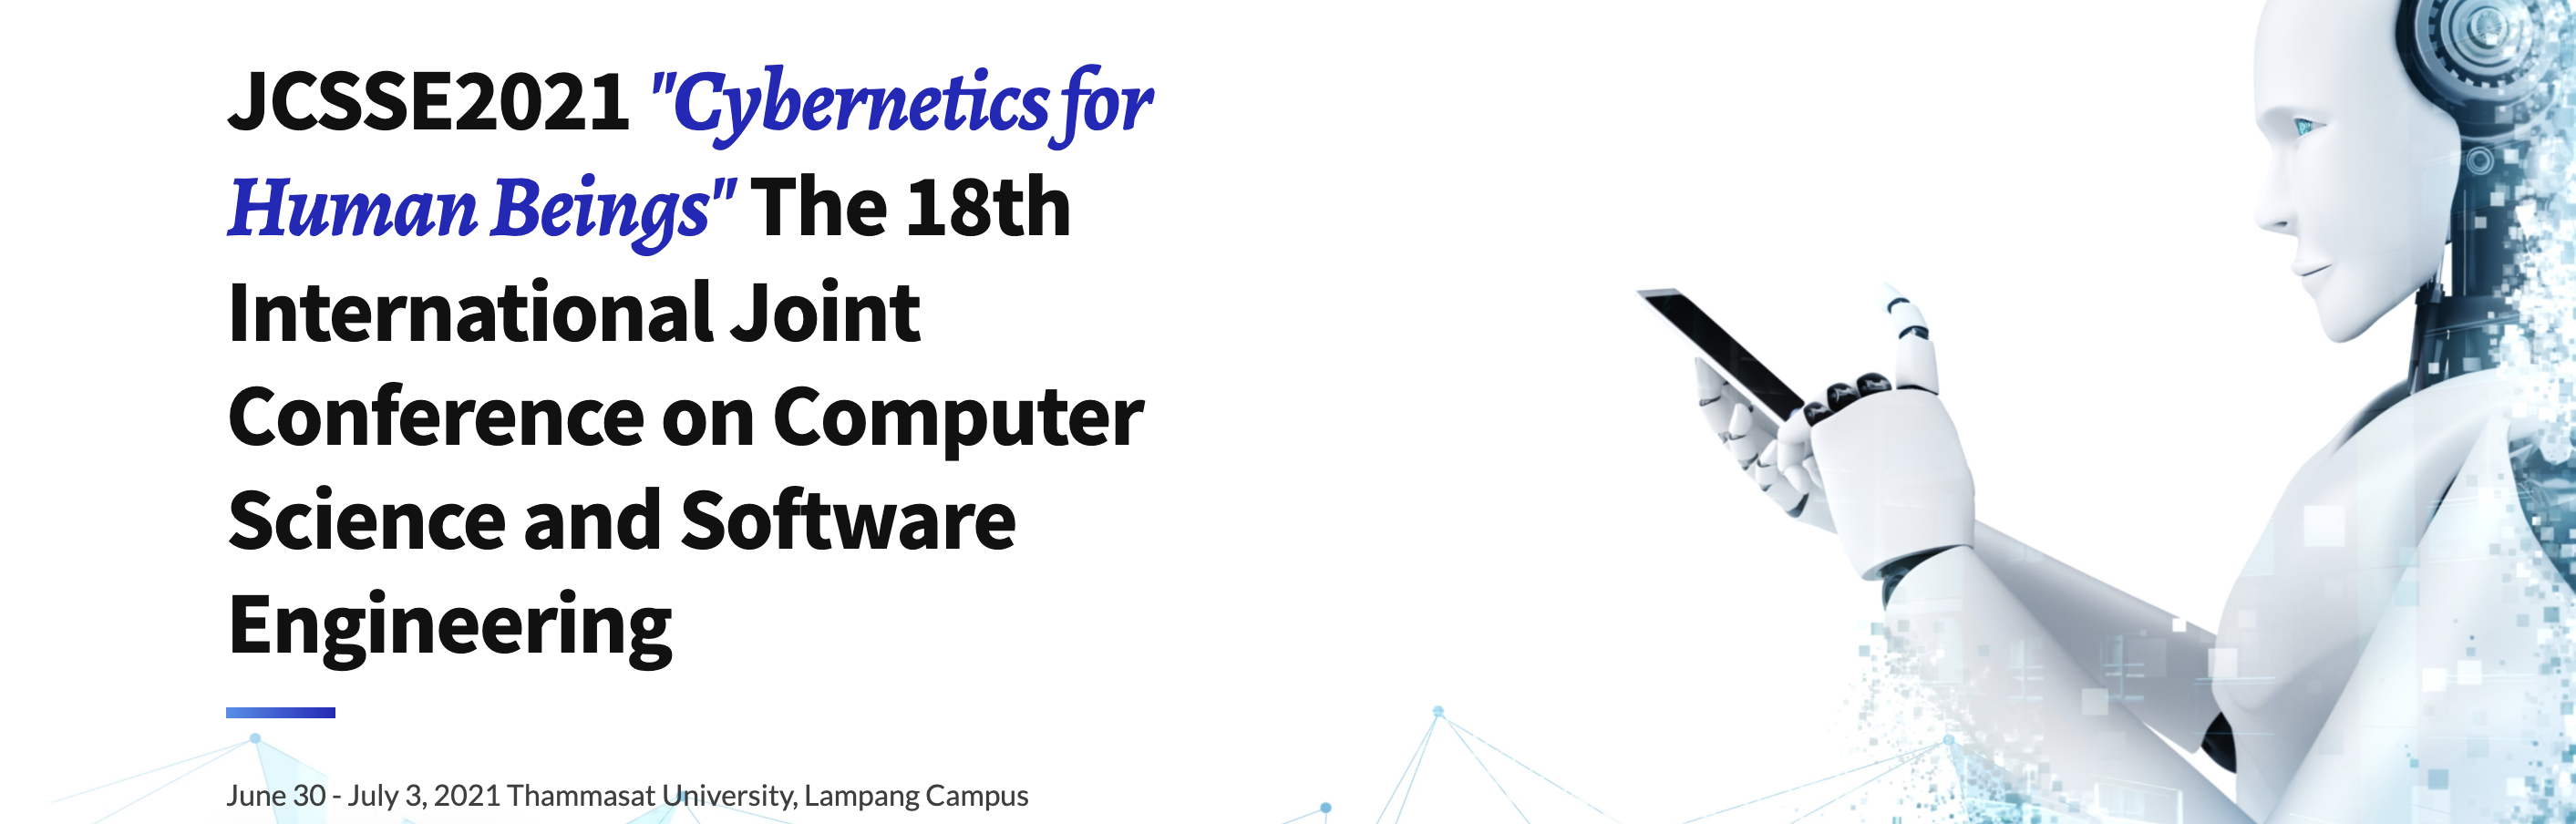 International Joint Conference on Computer Science and Software Engineering (JCSSE2021)